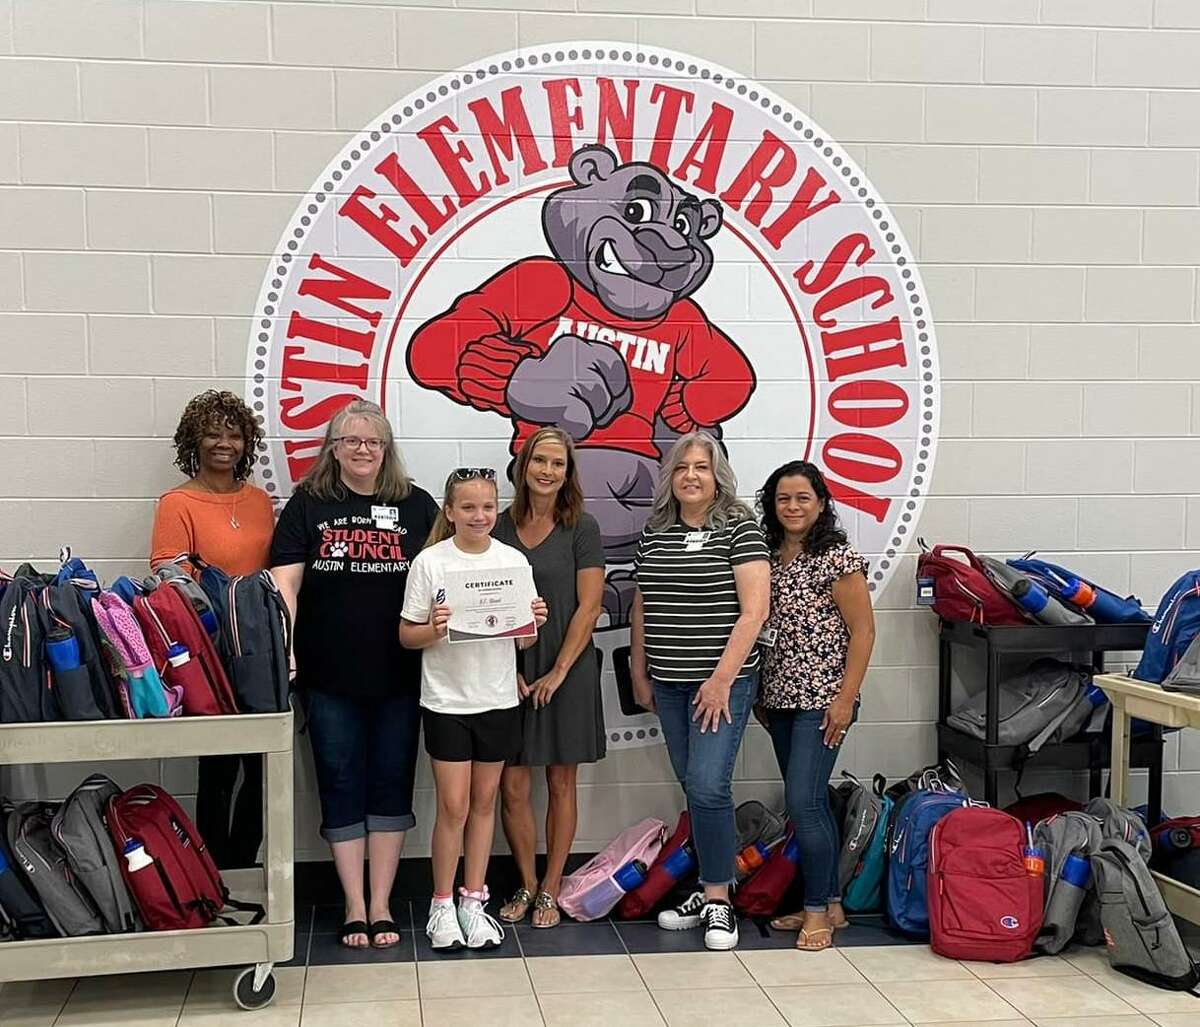 Since 2015, 12-year-old Baily Cowart has donated backpacks and school supplies to Conroe ISD schools. That first-year donation that could fit in a wagon has now snowballed into Cowart’s nonprofit B.E. Blessed that visited 11 Conroe ISD schools this past Monday delivering 839 filled backpacks so children returning to school can have everything that they need to get the school year off to a great start.